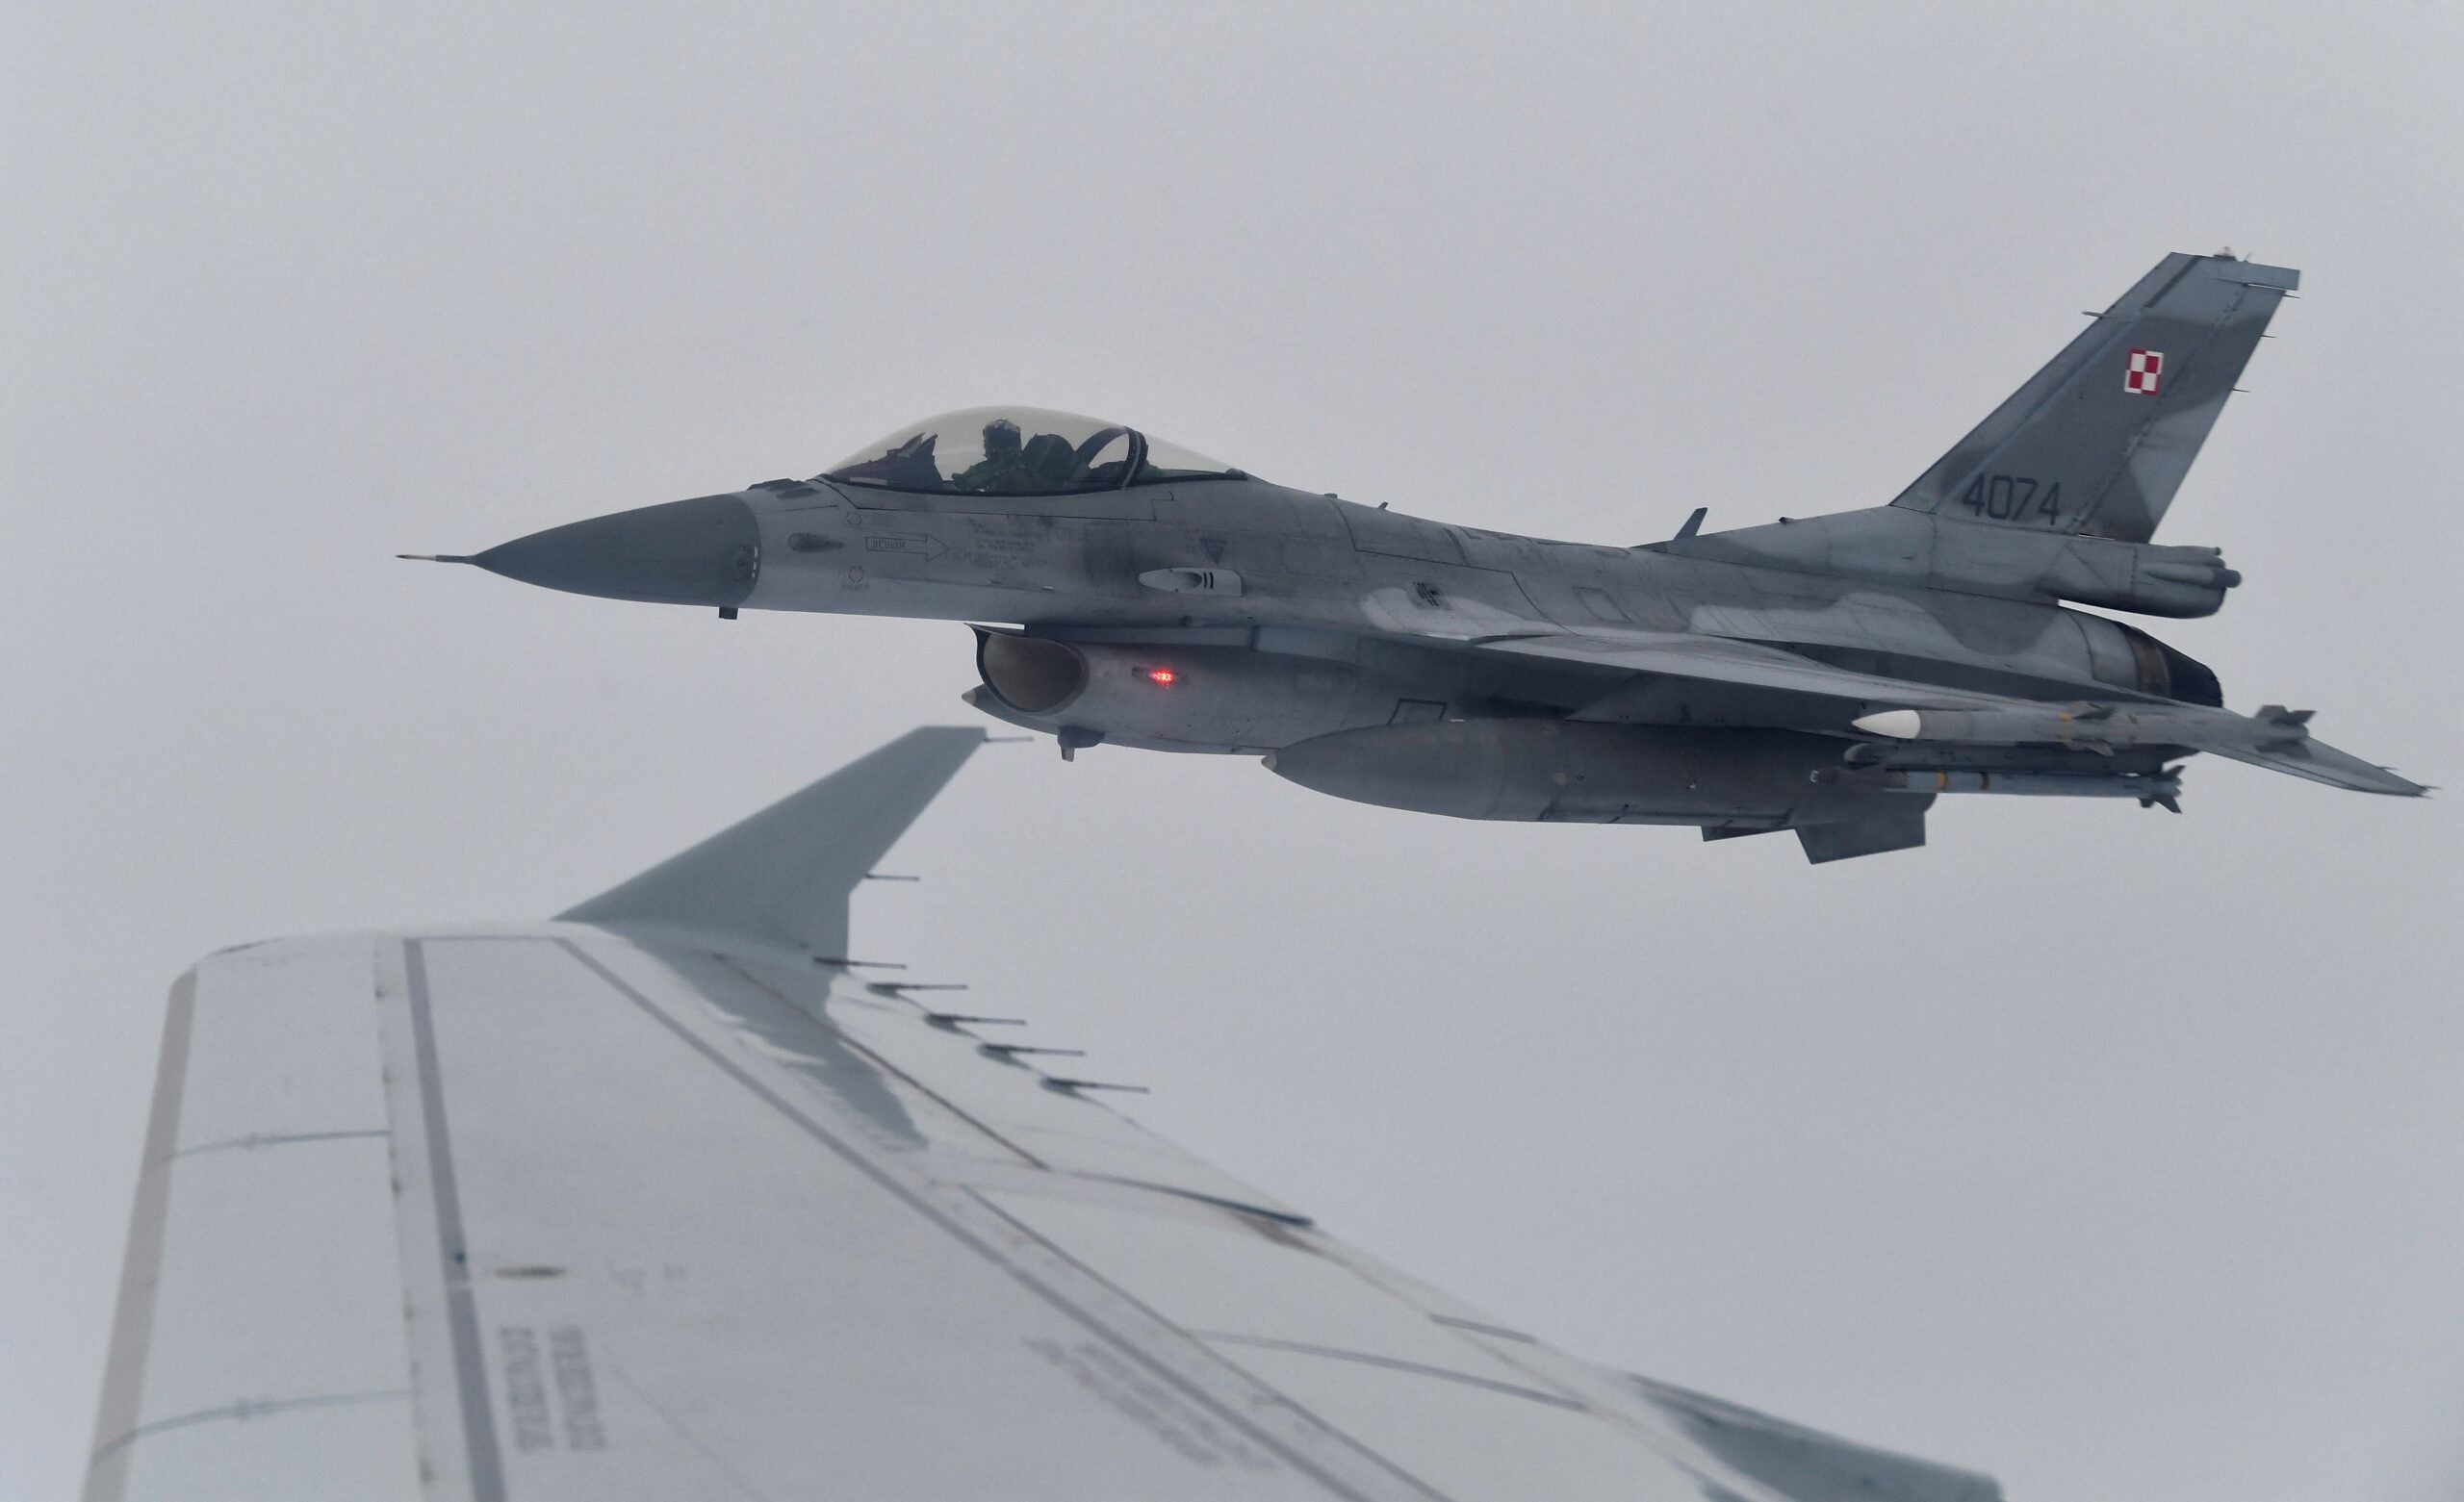 A F-16 of Polish Air Force is seen are seen during a NATOs Baltic Air Policing drill simulating an interception of a civilian flight near Siauliai airport in Lithuania, on January 14, 2020. (Photo by John THYS / AFP) (Photo by JOHN THYS/AFP via Getty Images)